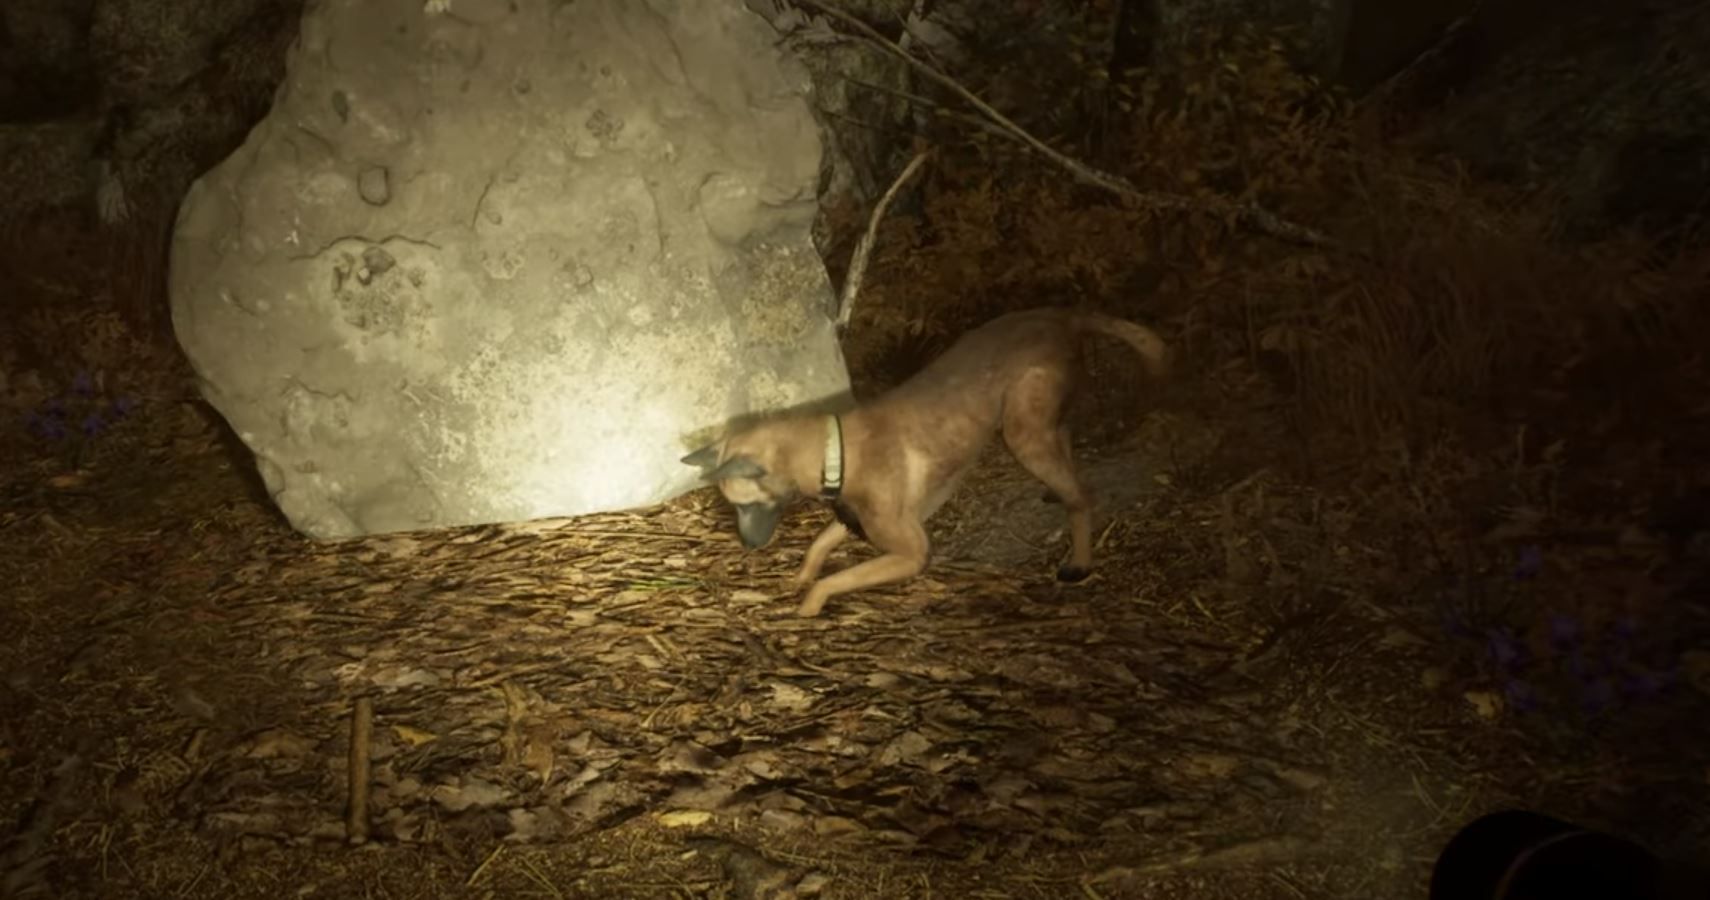 Blair Witch Gameplay Trailer Yes You Can Pet The Dog